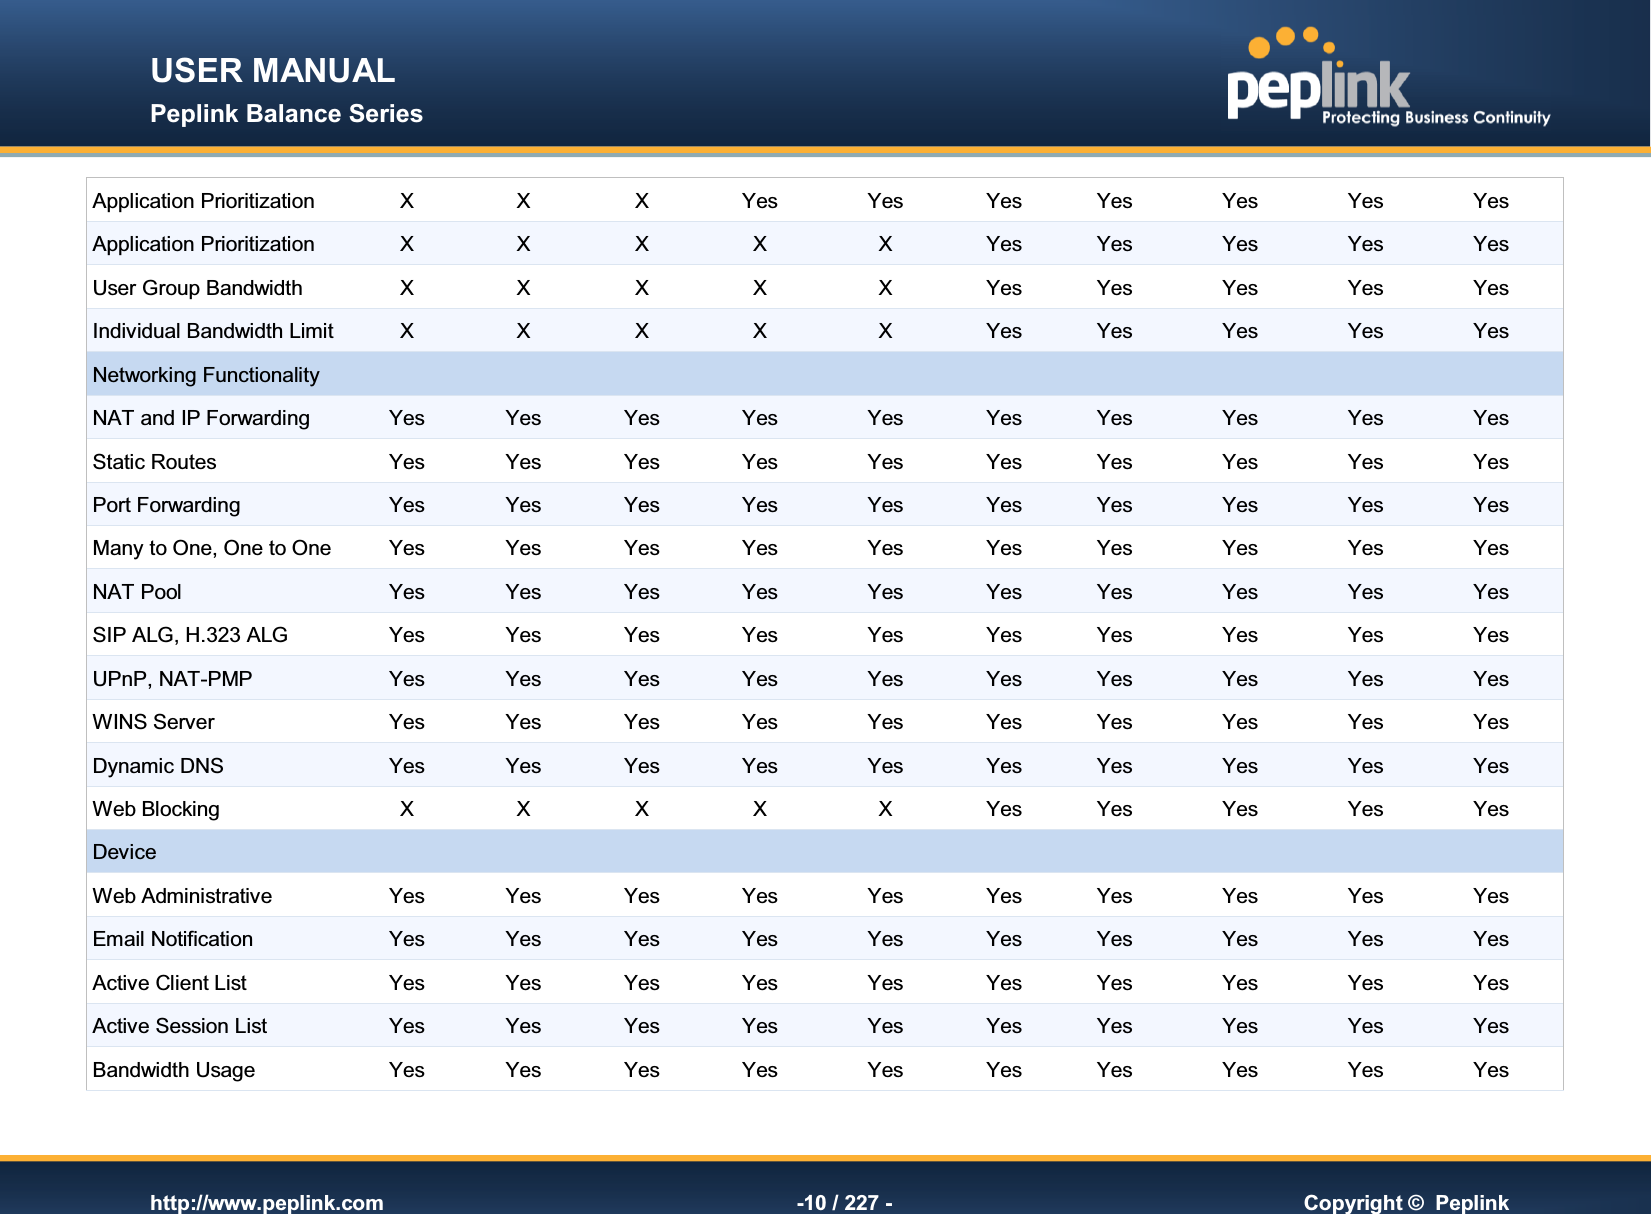 USER MANUAL Peplink Balance Series   http://www.peplink.com -10 / 227 -  Copyright ©  Peplink Application Prioritization X X X Yes Yes Yes Yes Yes Yes Yes Application Prioritization by User Group X X X X X Yes Yes Yes Yes Yes User Group Bandwidth Reservation X X X X X Yes Yes Yes Yes Yes Individual Bandwidth Limit X X X X X Yes Yes Yes Yes Yes Networking Functionality           NAT and IP Forwarding Yes Yes Yes Yes Yes Yes Yes Yes Yes Yes Static Routes Yes Yes Yes Yes Yes Yes Yes Yes Yes Yes Port Forwarding Yes Yes Yes Yes Yes Yes Yes Yes Yes Yes Many to One, One to One NATYes Yes Yes Yes Yes Yes Yes Yes Yes Yes NAT Pool Yes Yes Yes Yes Yes Yes Yes Yes Yes Yes SIP ALG, H.323 ALG Yes Yes Yes Yes Yes Yes Yes Yes Yes Yes UPnP, NAT-PMP Yes Yes Yes Yes Yes Yes Yes Yes Yes Yes WINS Server Yes Yes Yes Yes Yes Yes Yes Yes Yes Yes Dynamic DNS Yes Yes Yes Yes Yes Yes Yes Yes Yes Yes Web Blocking X X X X X Yes Yes Yes Yes Yes Device Management          Web Administrative Interface Yes Yes Yes Yes Yes Yes Yes Yes Yes Yes Email Notification Yes Yes Yes Yes Yes Yes Yes Yes Yes Yes Active Client List Yes Yes Yes Yes Yes Yes Yes Yes Yes Yes Active Session List Yes Yes Yes Yes Yes Yes Yes Yes Yes Yes Bandwidth Usage Statistics Yes Yes Yes Yes Yes Yes Yes Yes Yes Yes 